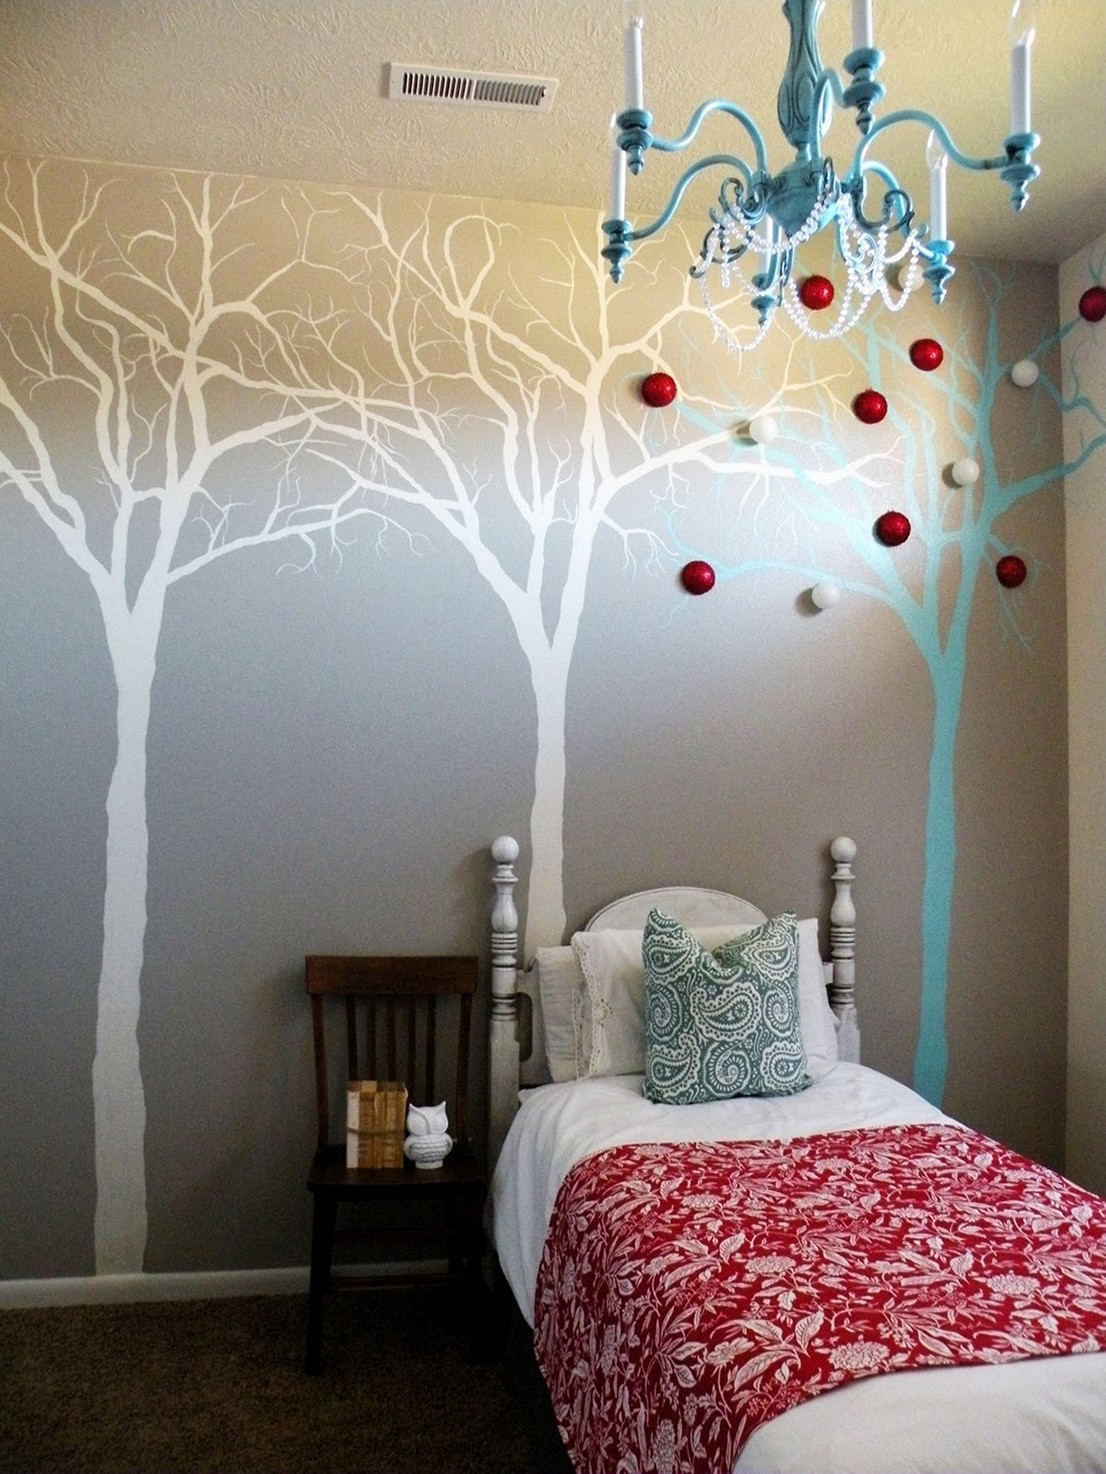 Bedroom Wall Painting Ideas
 60 Classy And Marvelous Bedroom Wall Design Ideas – The